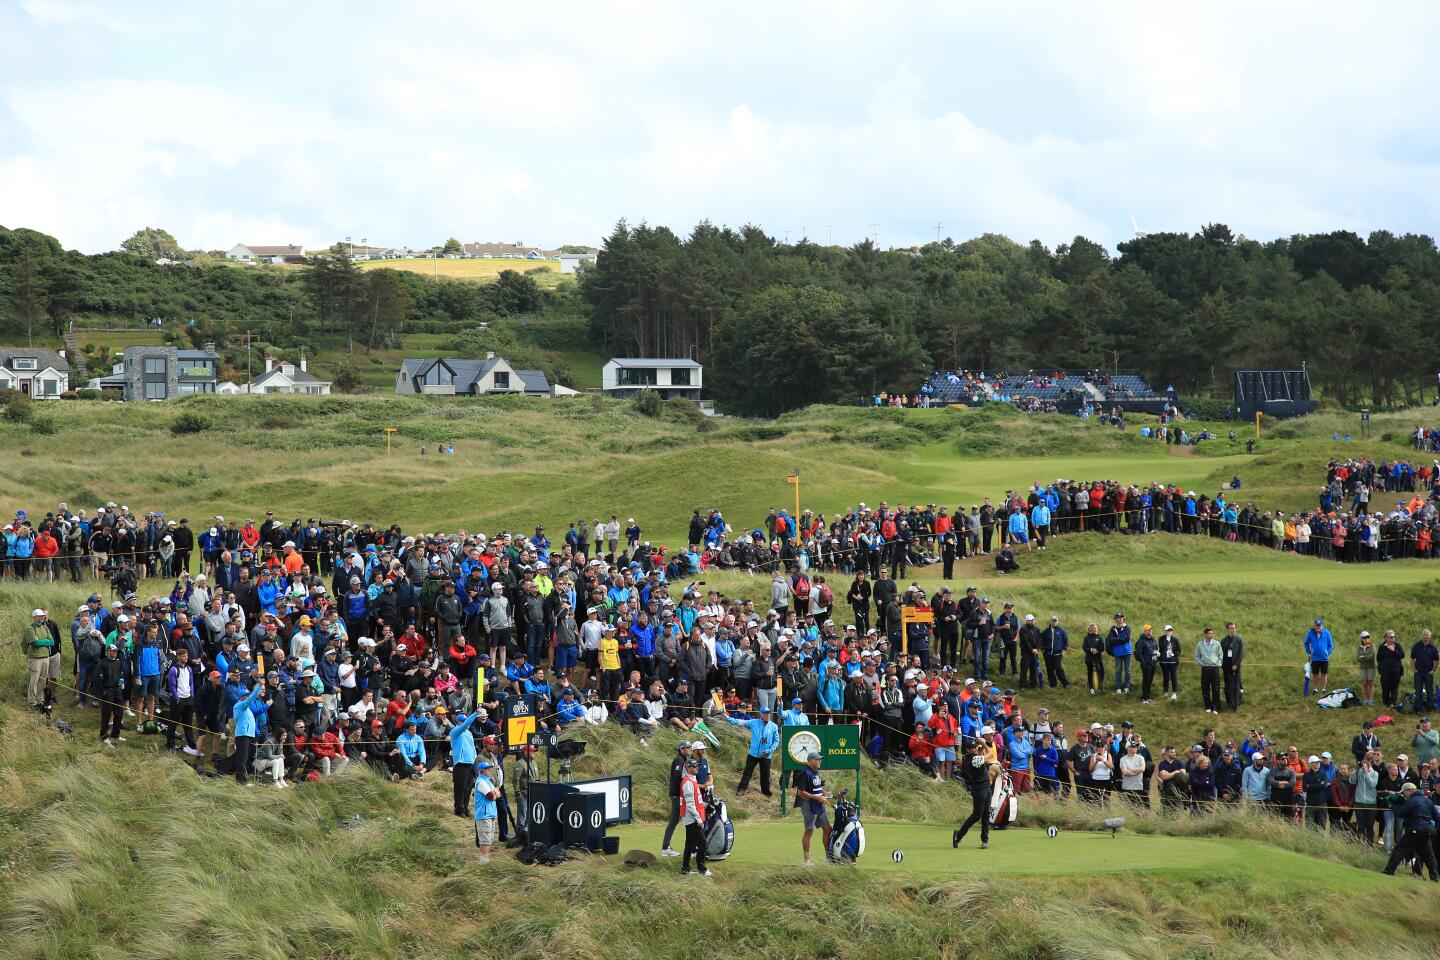 Jason Day of Australia tees off on the seventh hole, foreground, during the first round of the 148th Open Championship at Royal Portrush Golf Club in Northern Ireland.